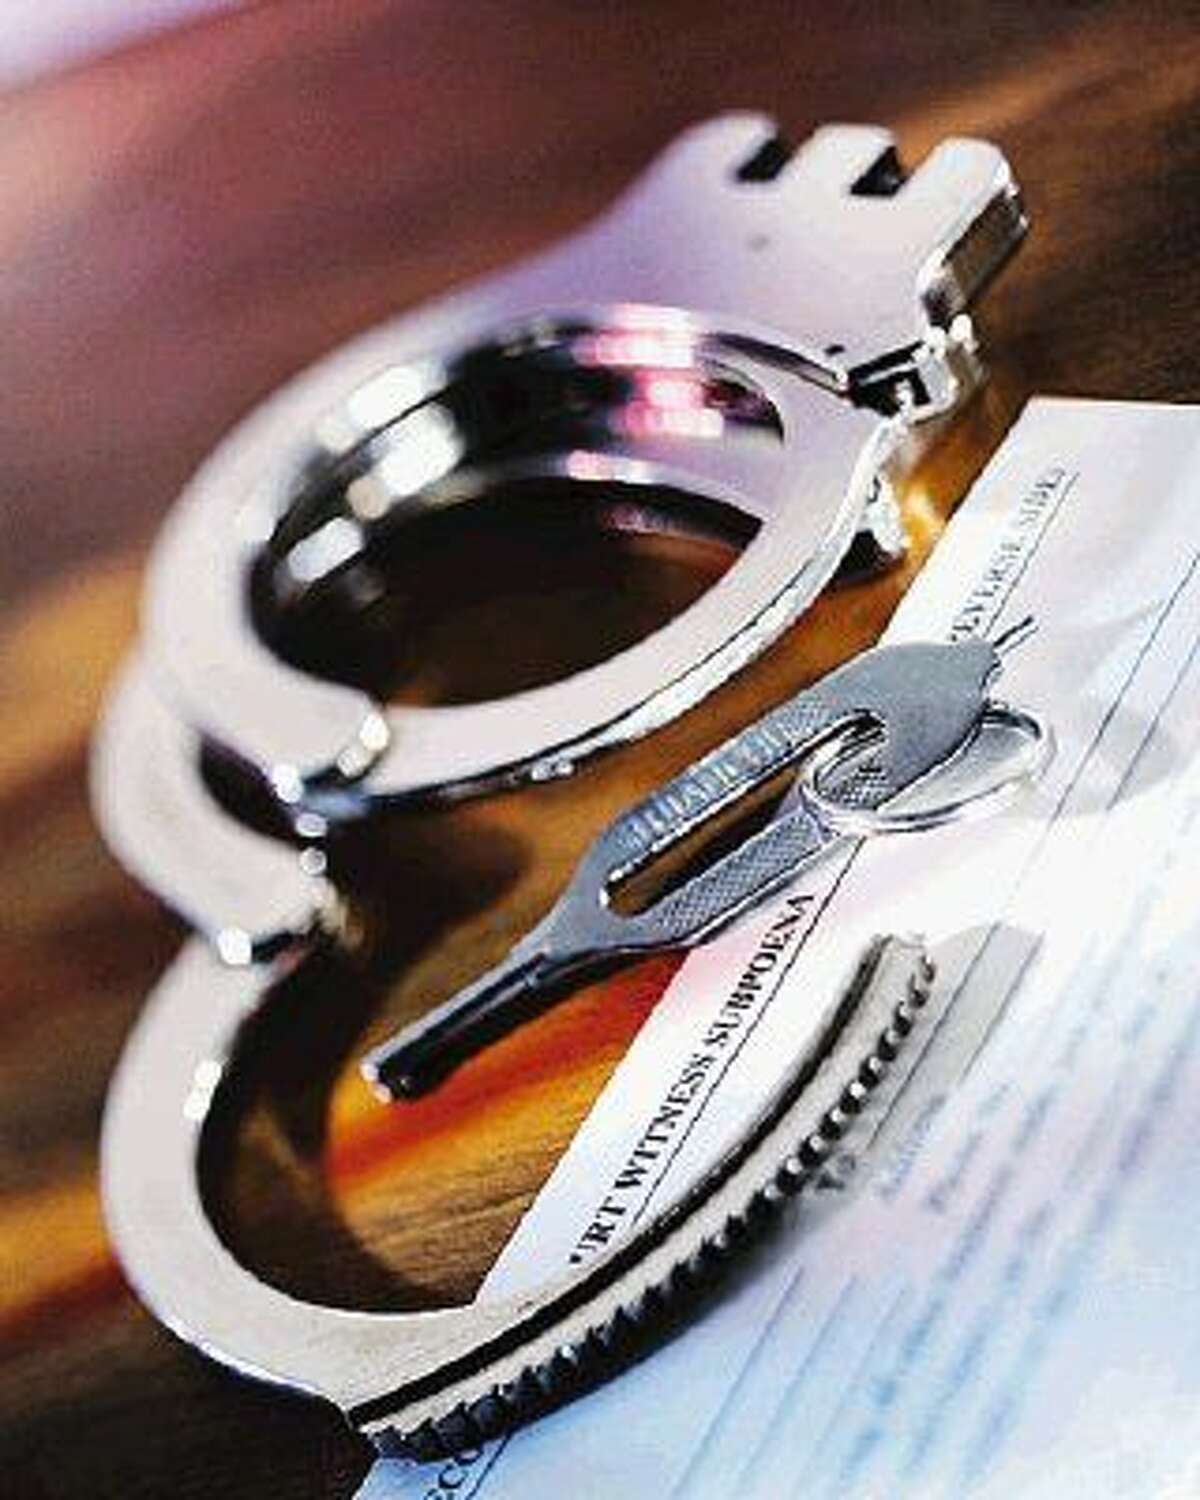 Handcuffs and Key